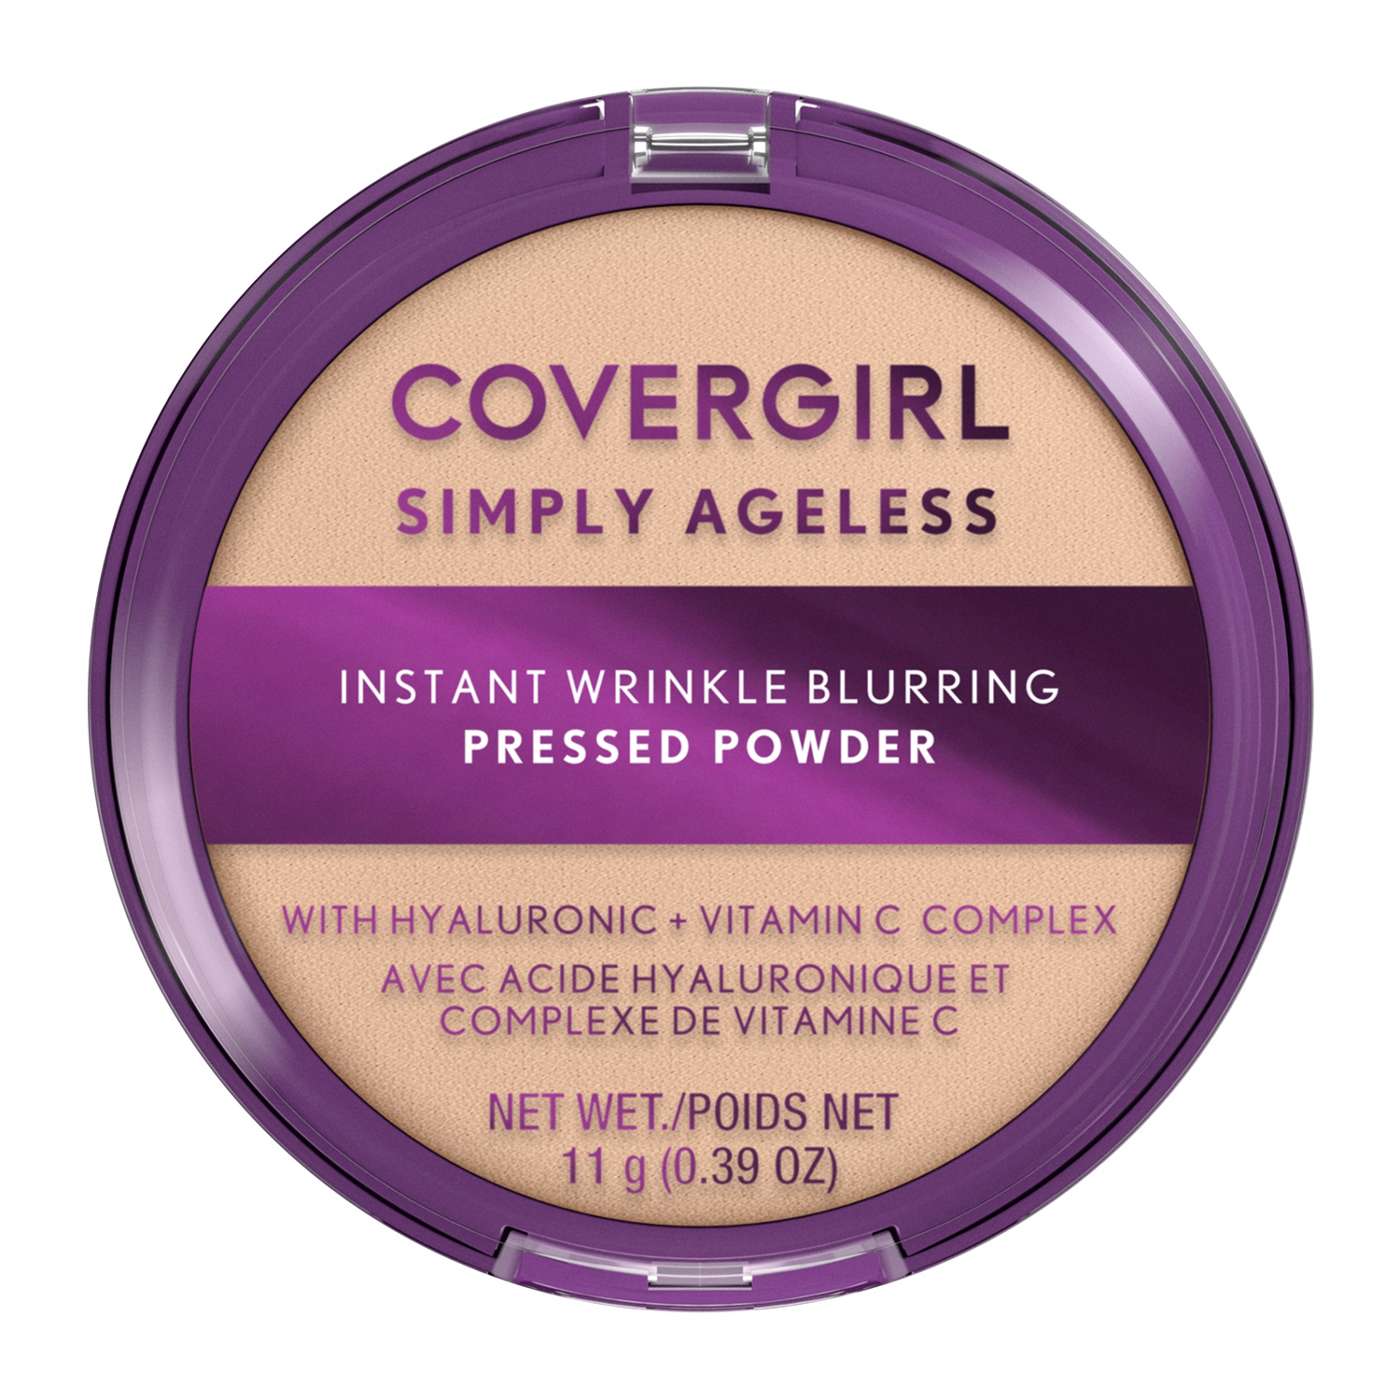 Covergirl Simply Ageless Pressed Powder 200 Fair Ivory; image 1 of 10